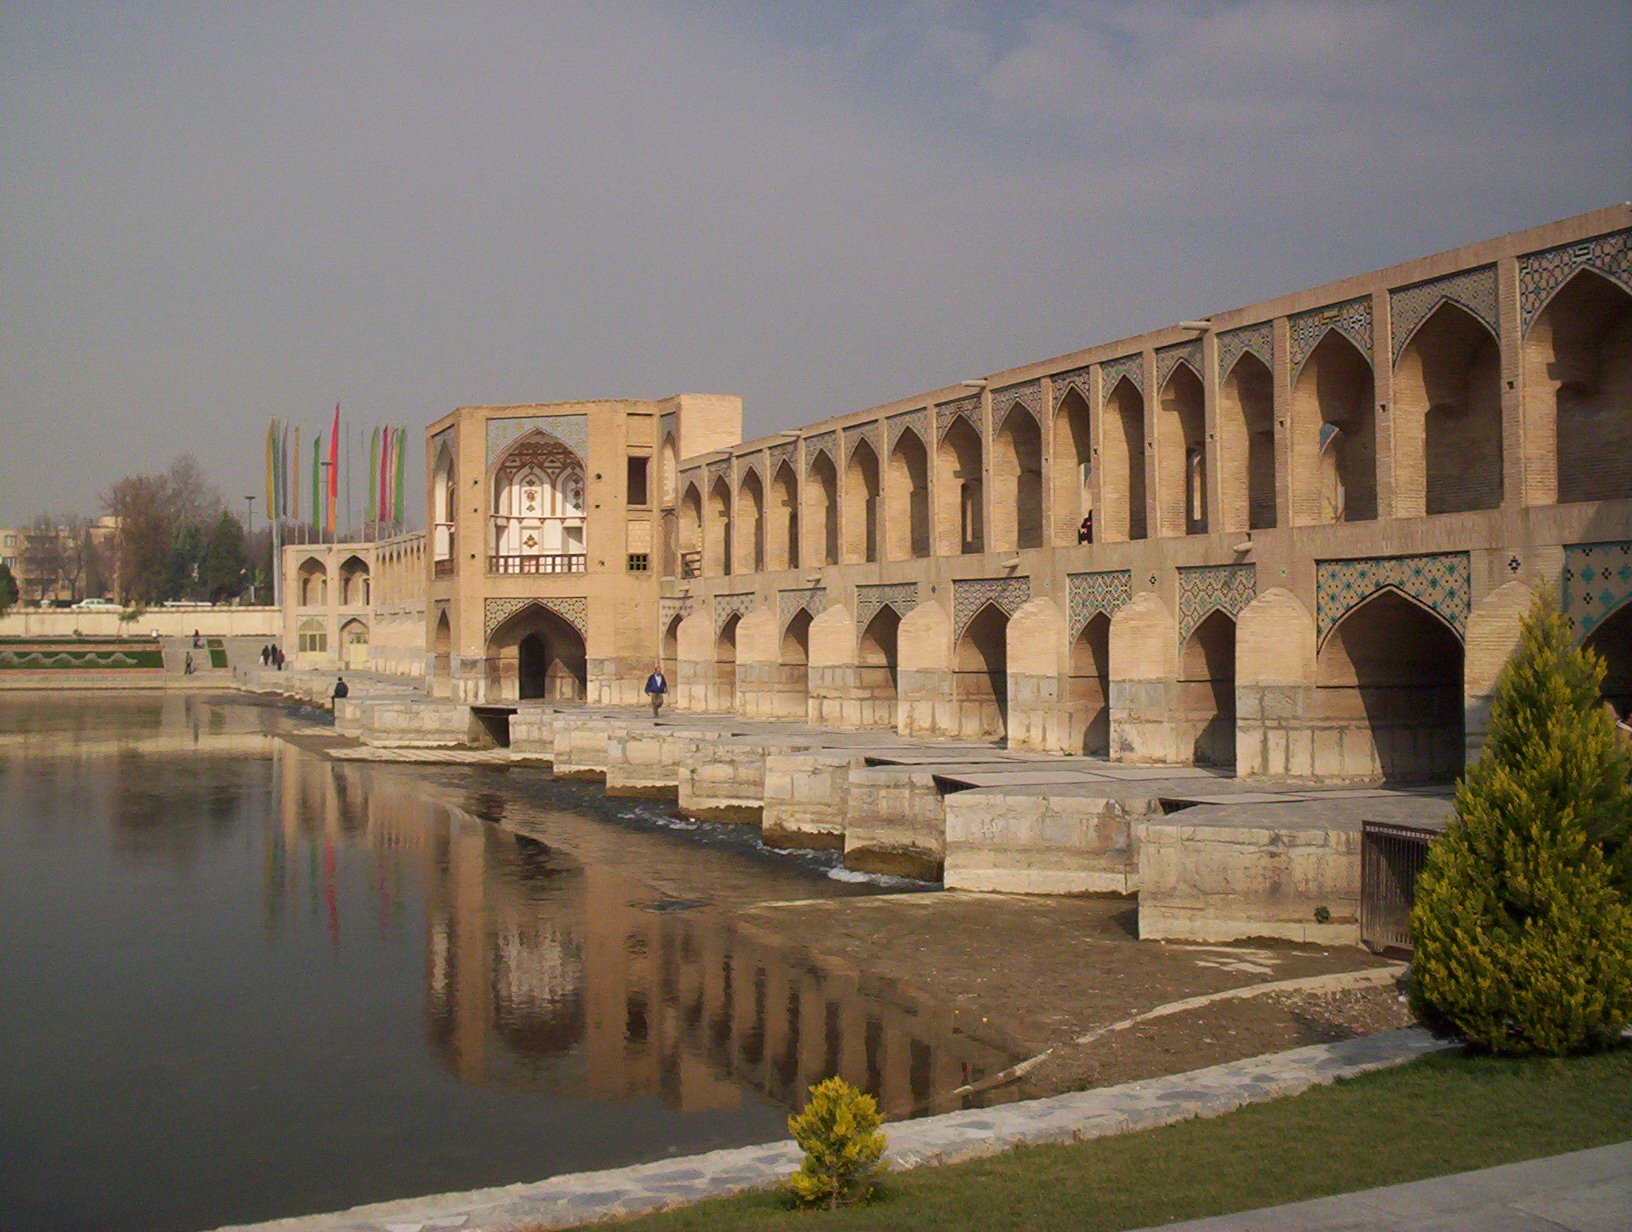 Khaju Bridge, Esfahan. The lower plinths were designed to be utilised by locals reciting poetry.